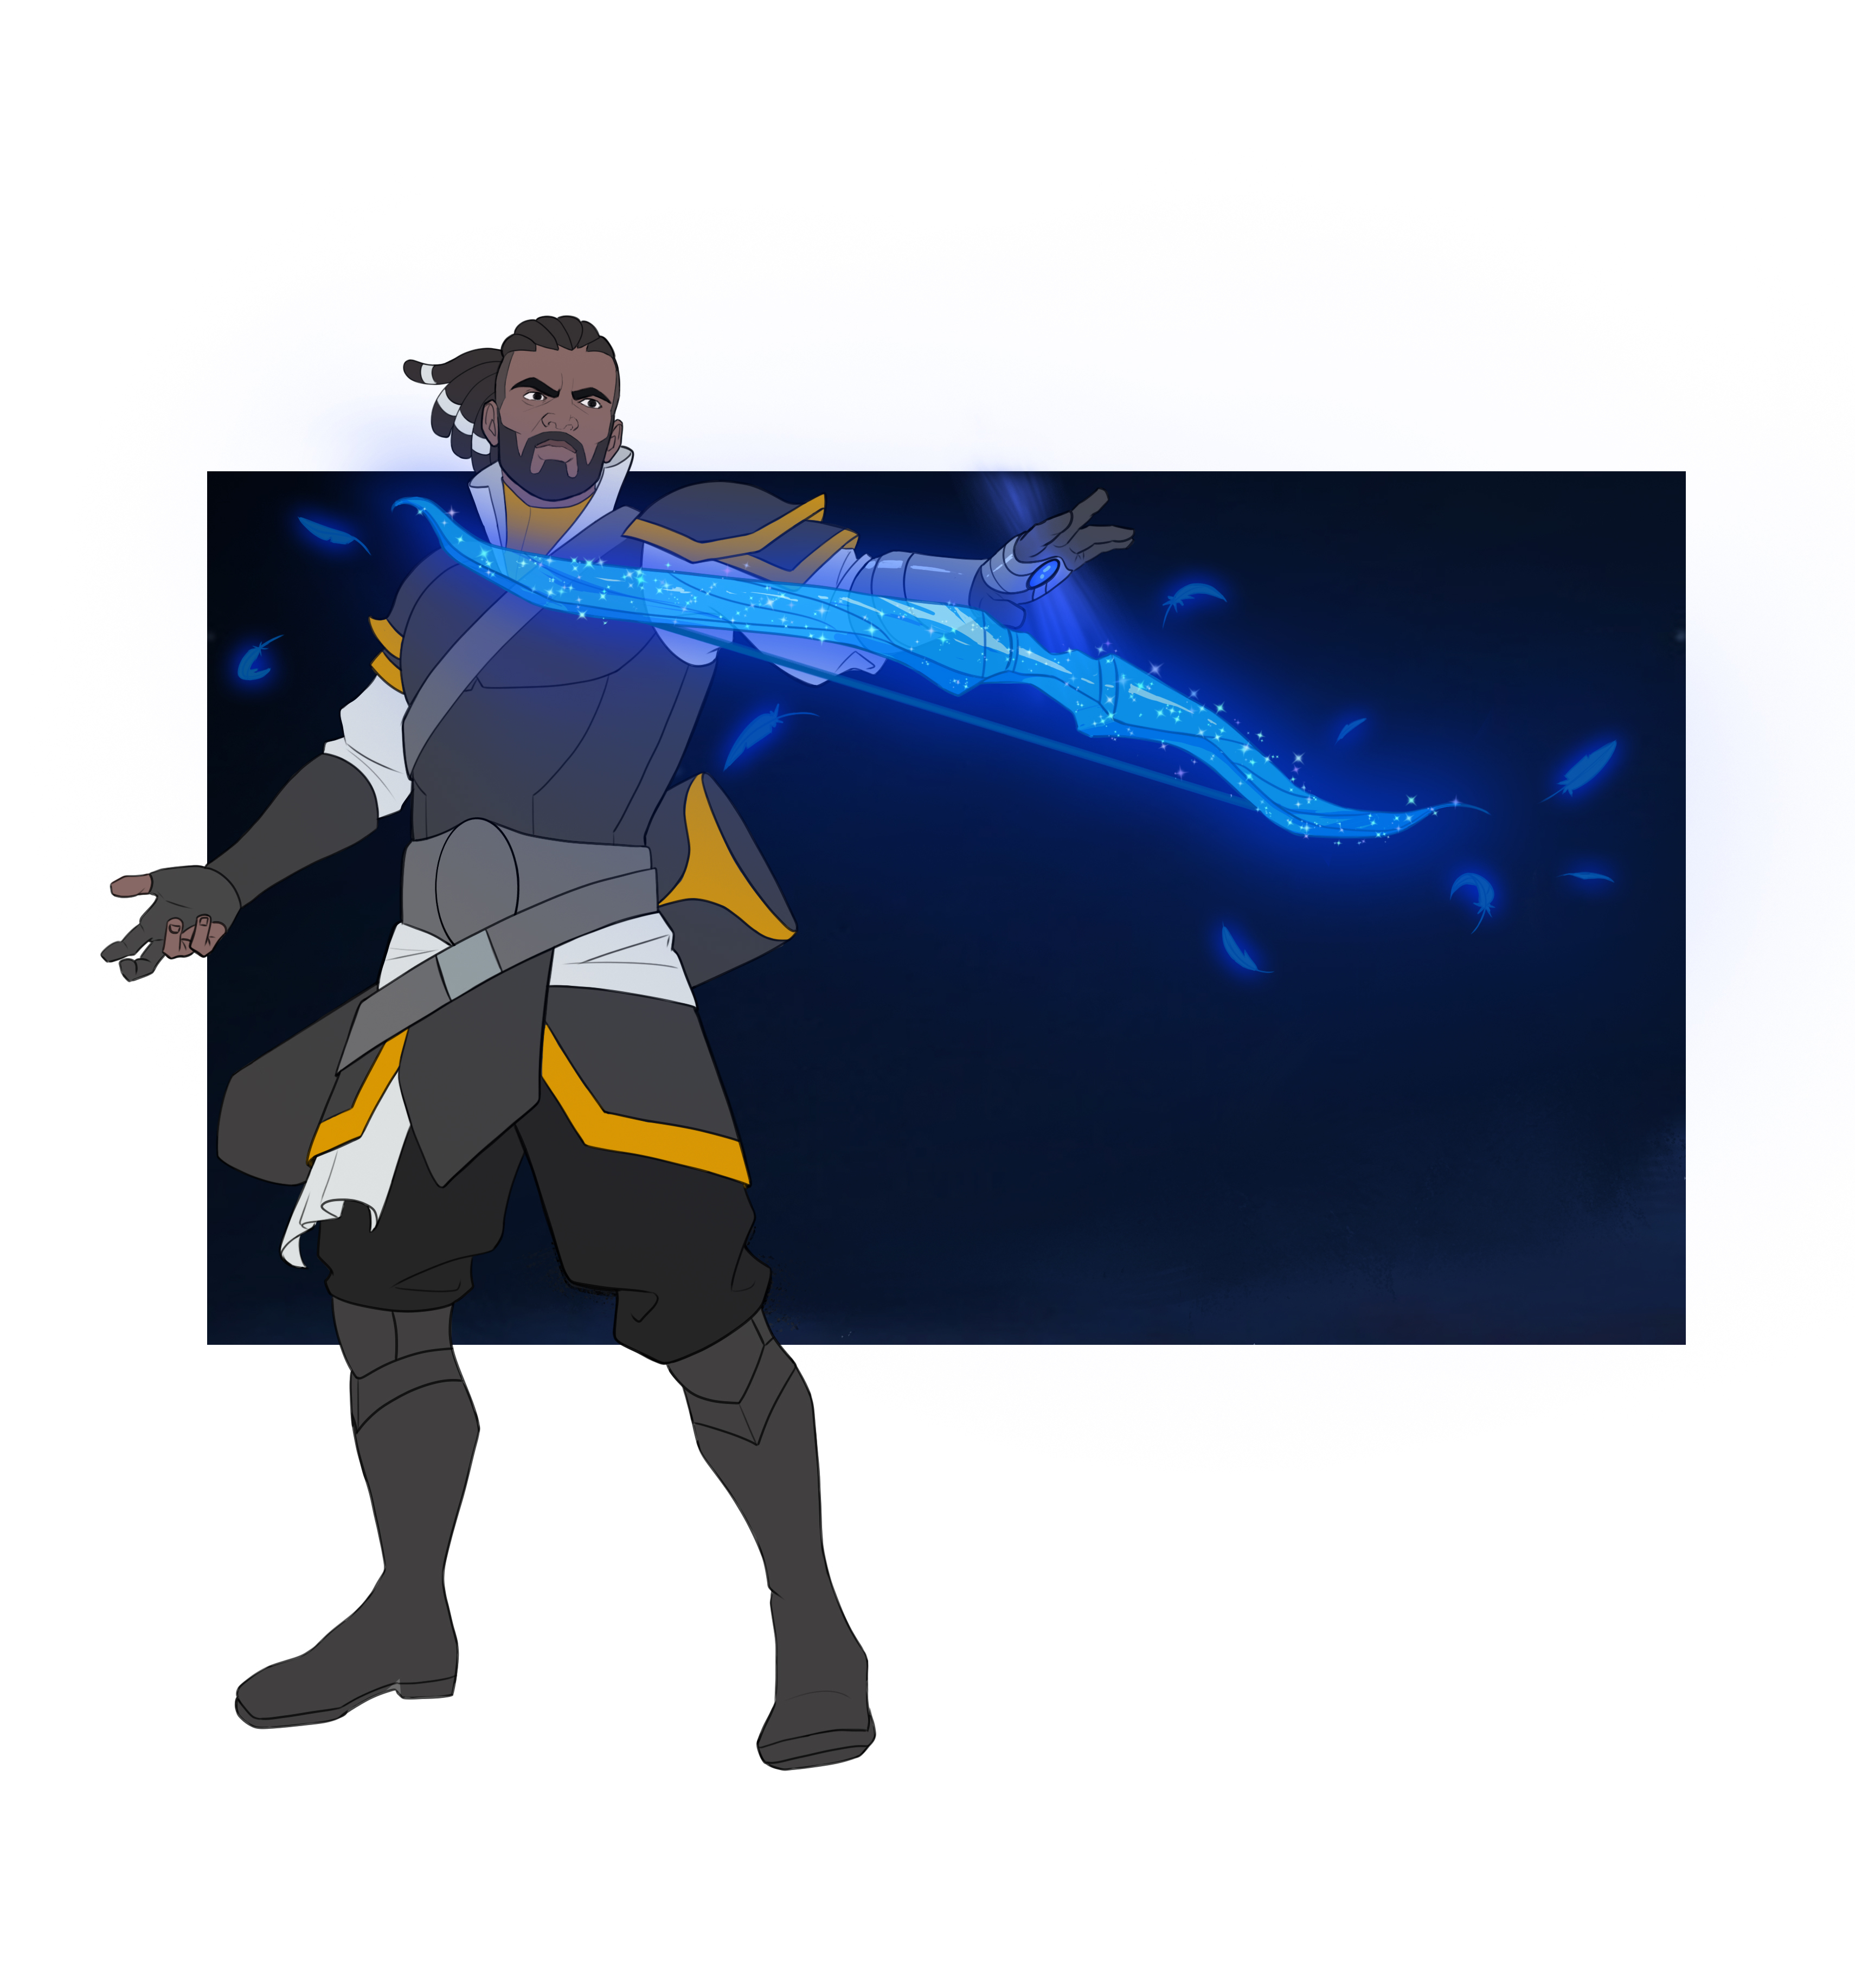 Hawkins, a Black male archer, summons his unique ghostly bow from the spirit realms. He stands in a heroic pose, with one arm back and is weaing primarily grey cloak in a modern style, with yellow accents.